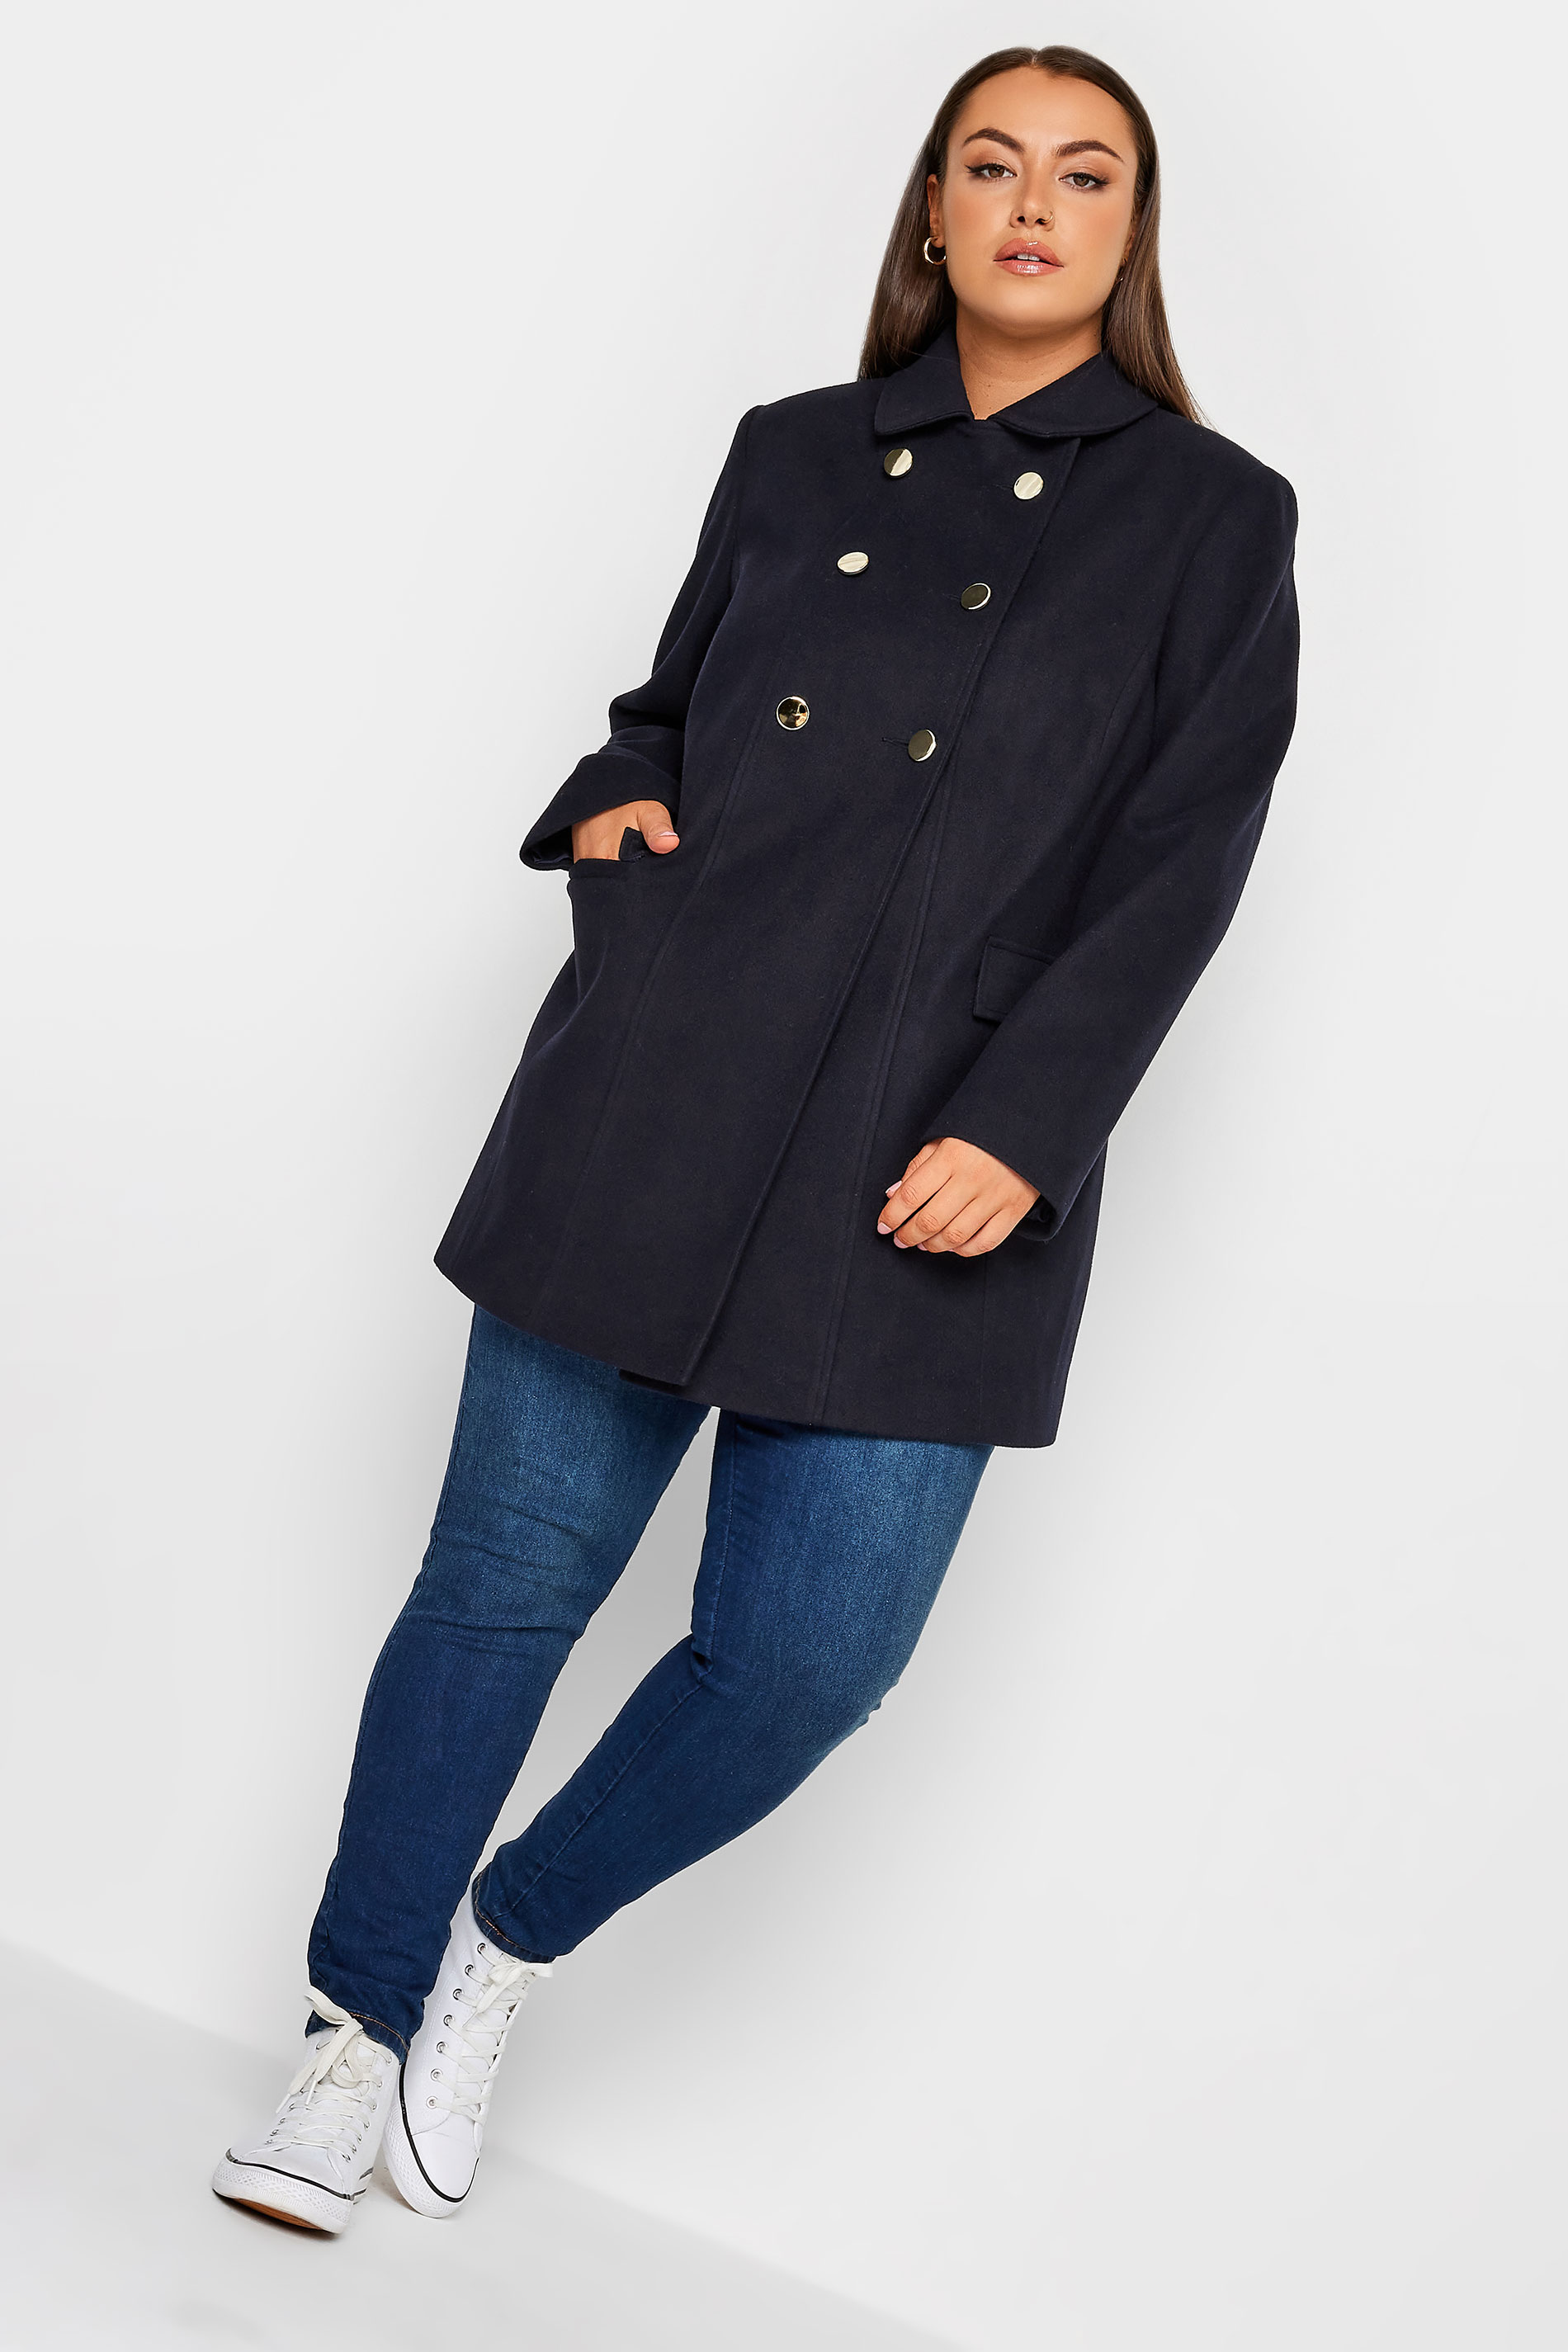 YOURS Plus Size Navy Blue Collared Formal Coat | Yours Clothing